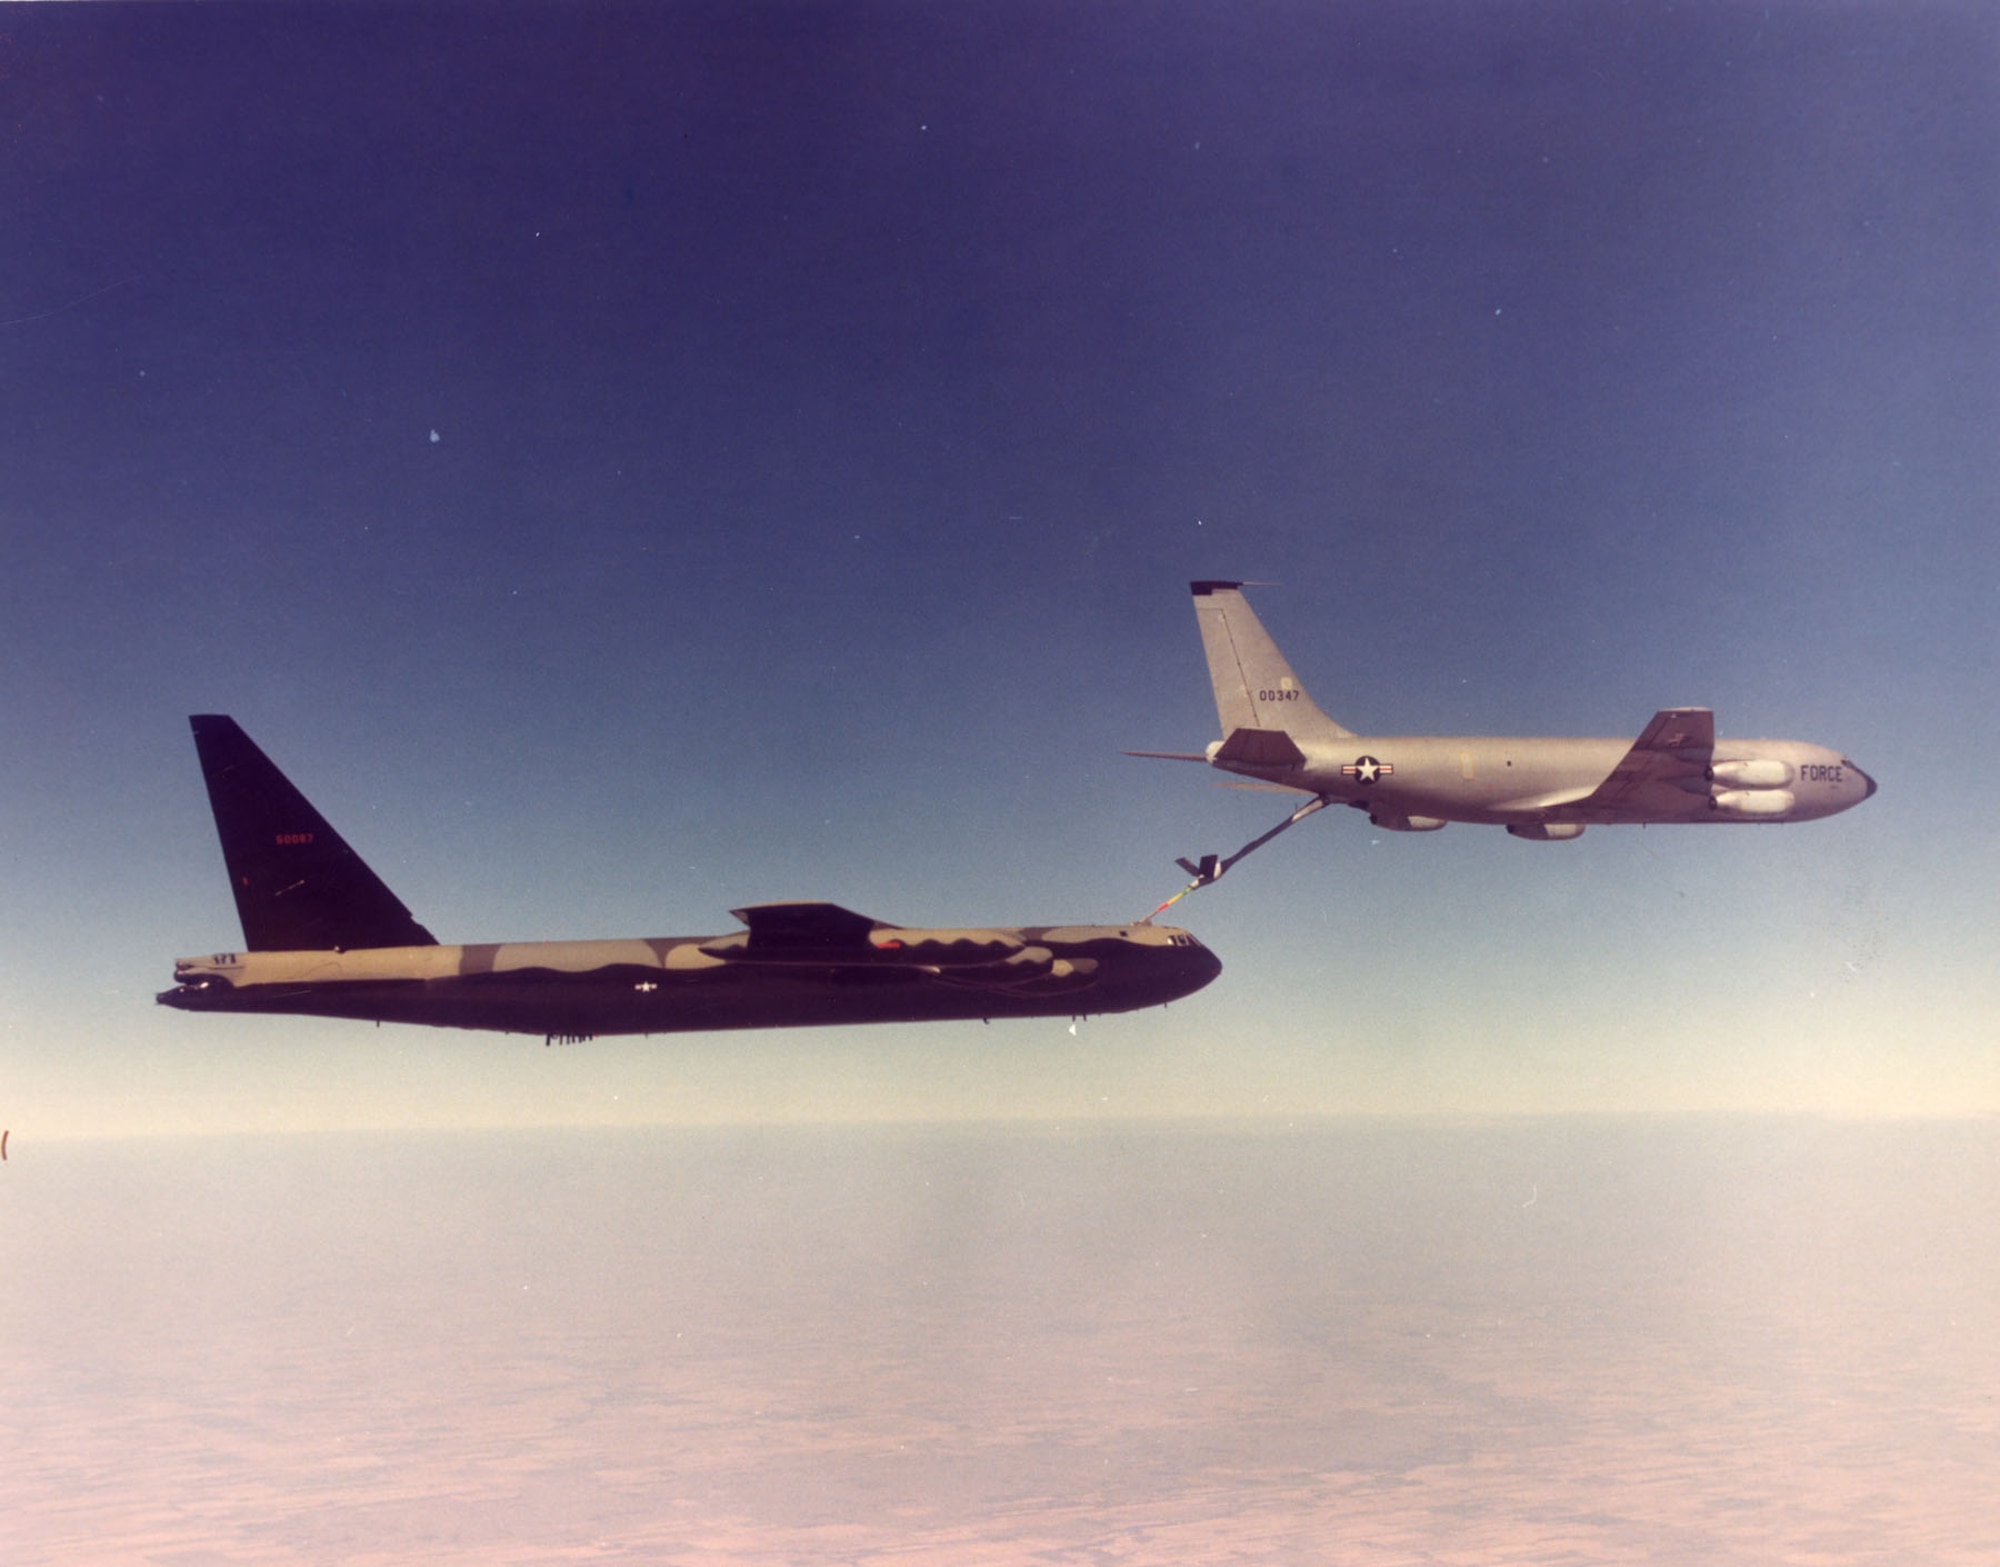 Even long-range bombers like the B-52 needed refueling to reach their targets and return to base on far-off Guam. Bombing operations such as ARC LIGHT and LINEBACKER depended heavily on air refueling. (U.S. Air Force photo)